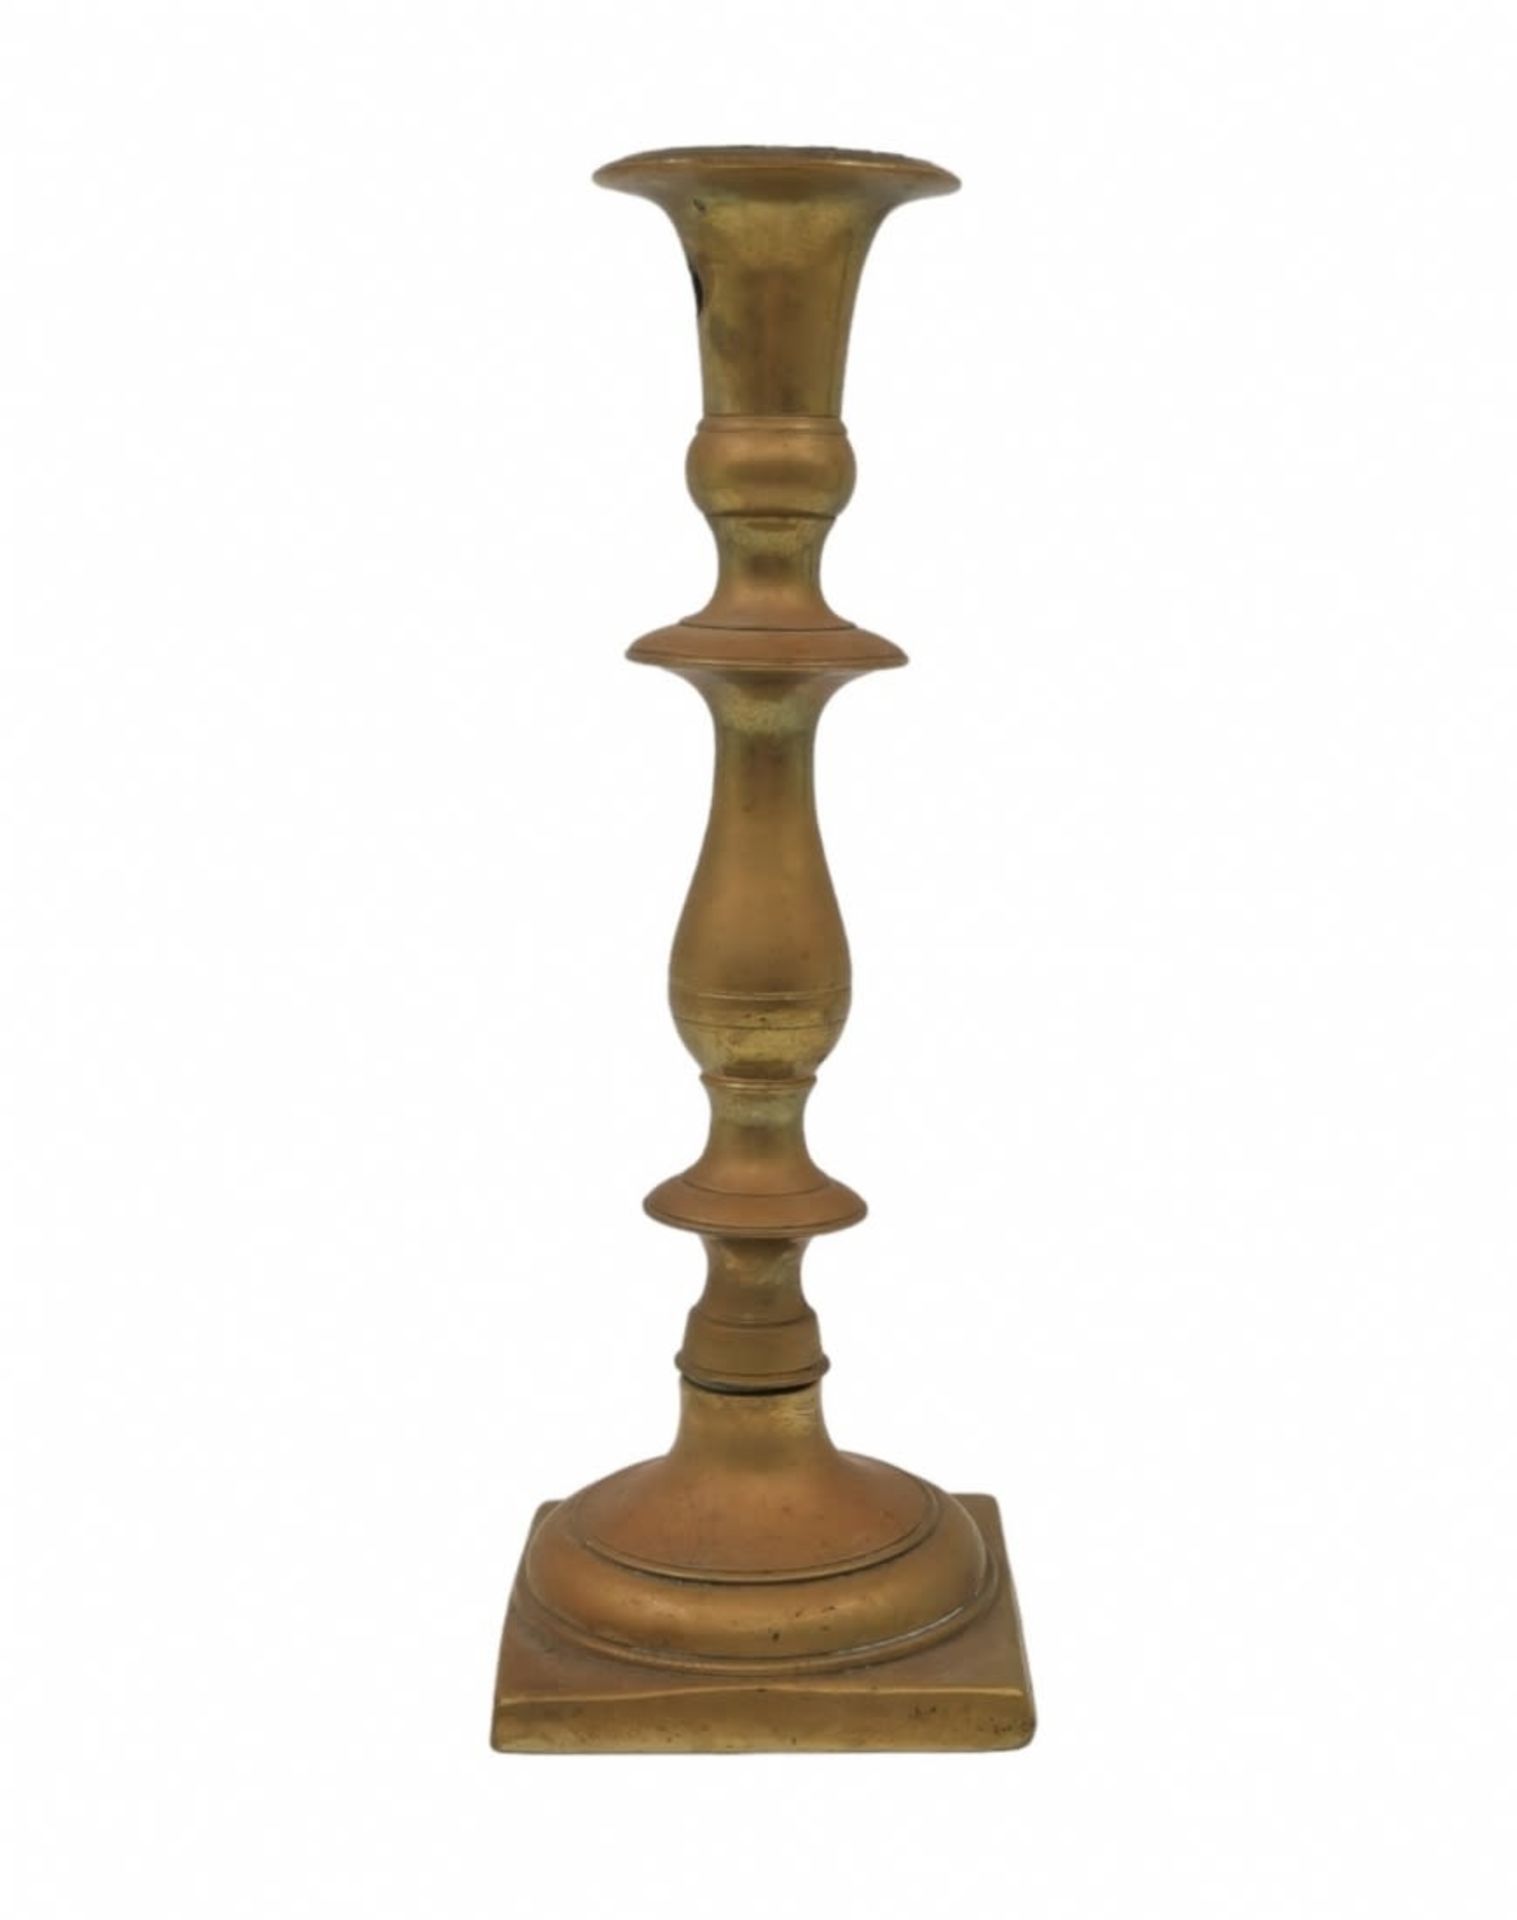 An antique Jewish candlestick from the 18th century, made of bronze (two parts), converted in the